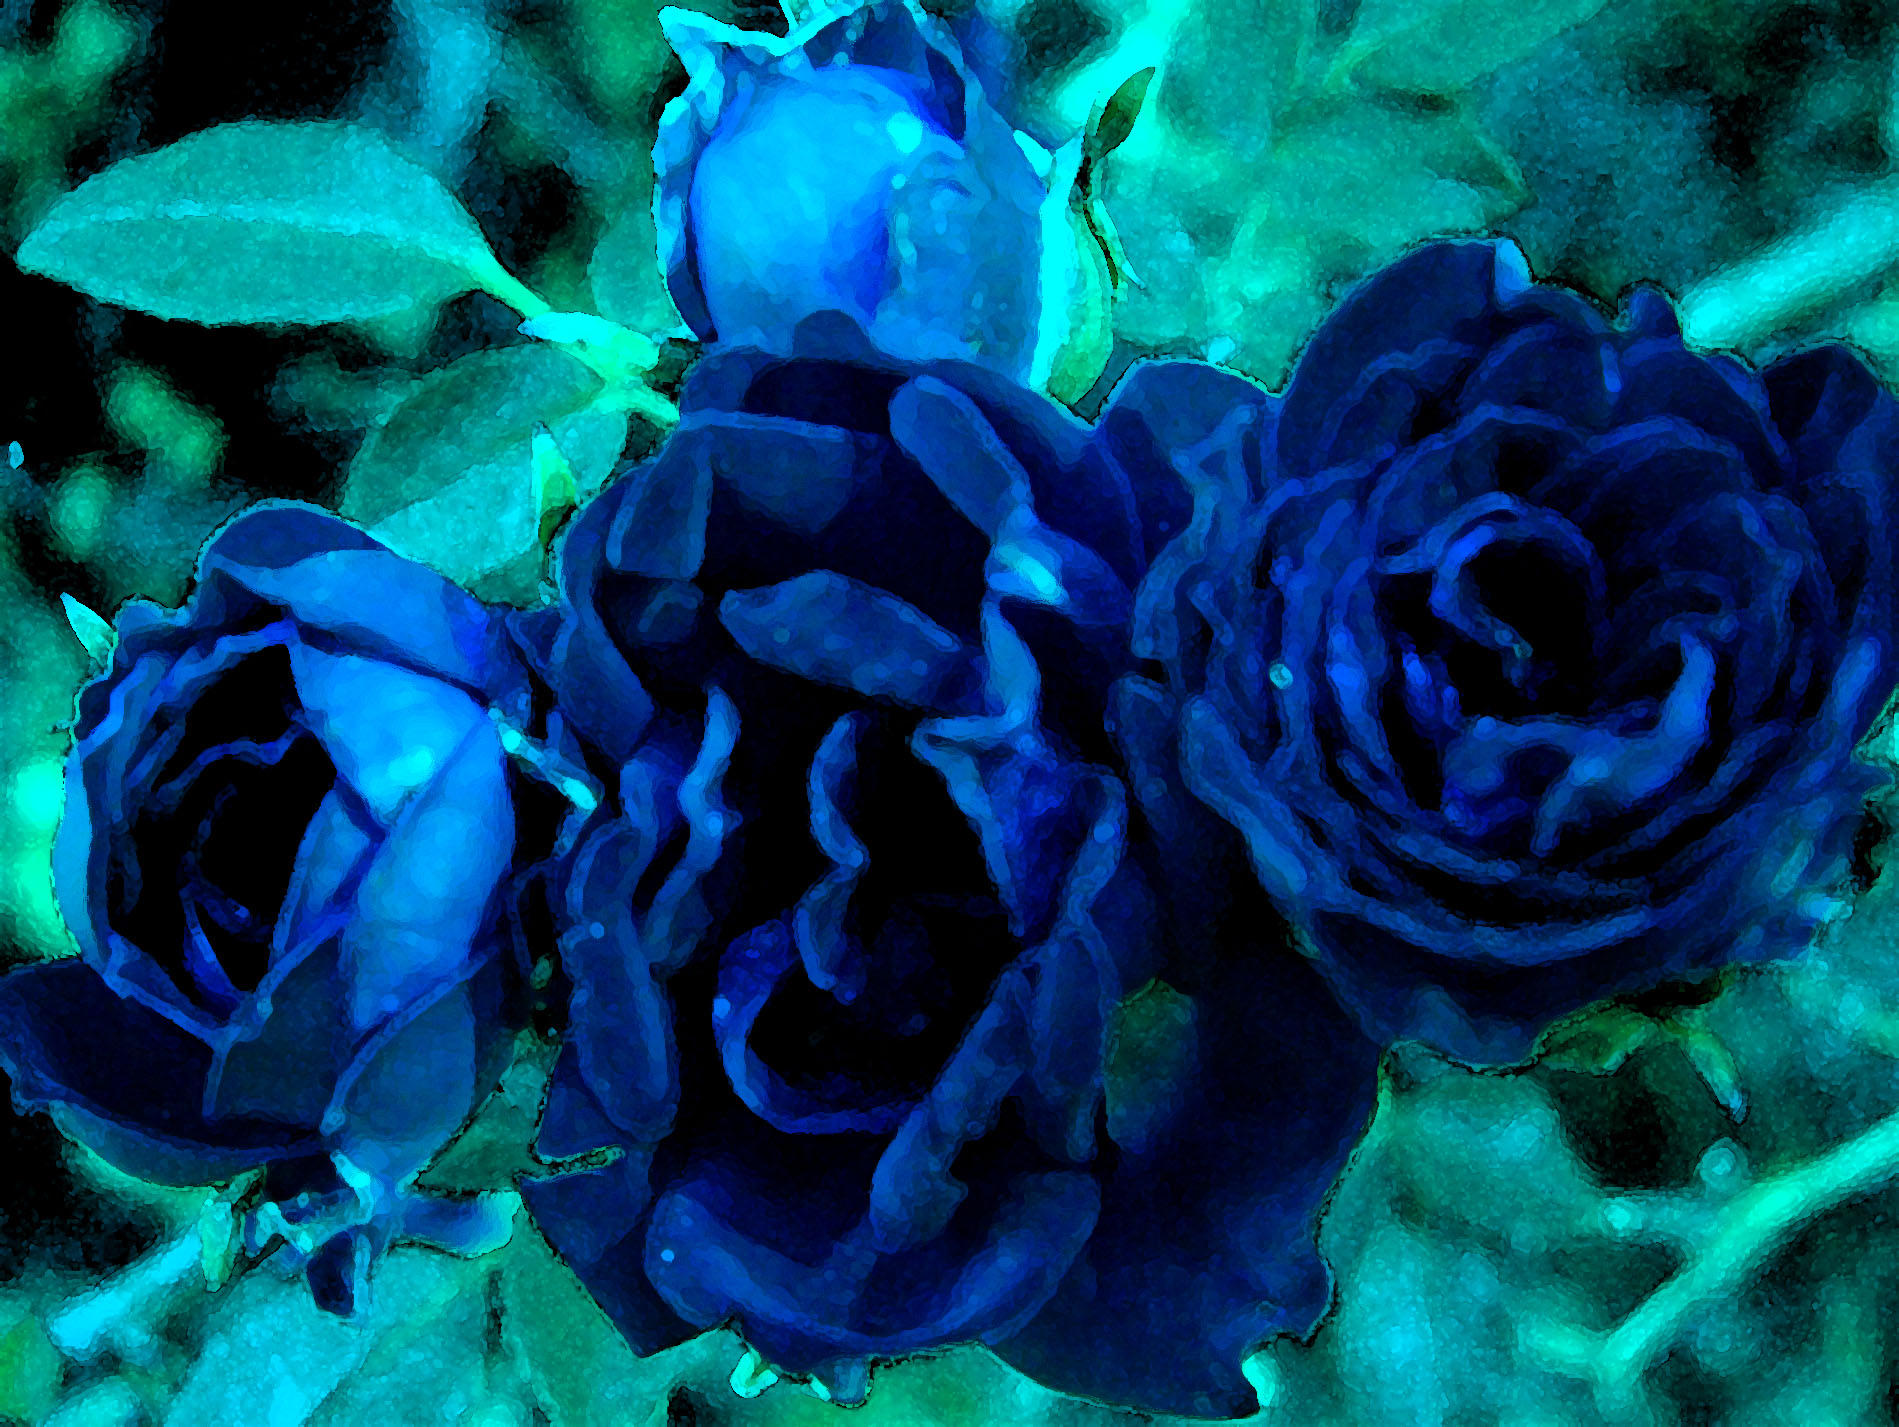 blue_roses_by_gluttony666.jpg (1899×1427)